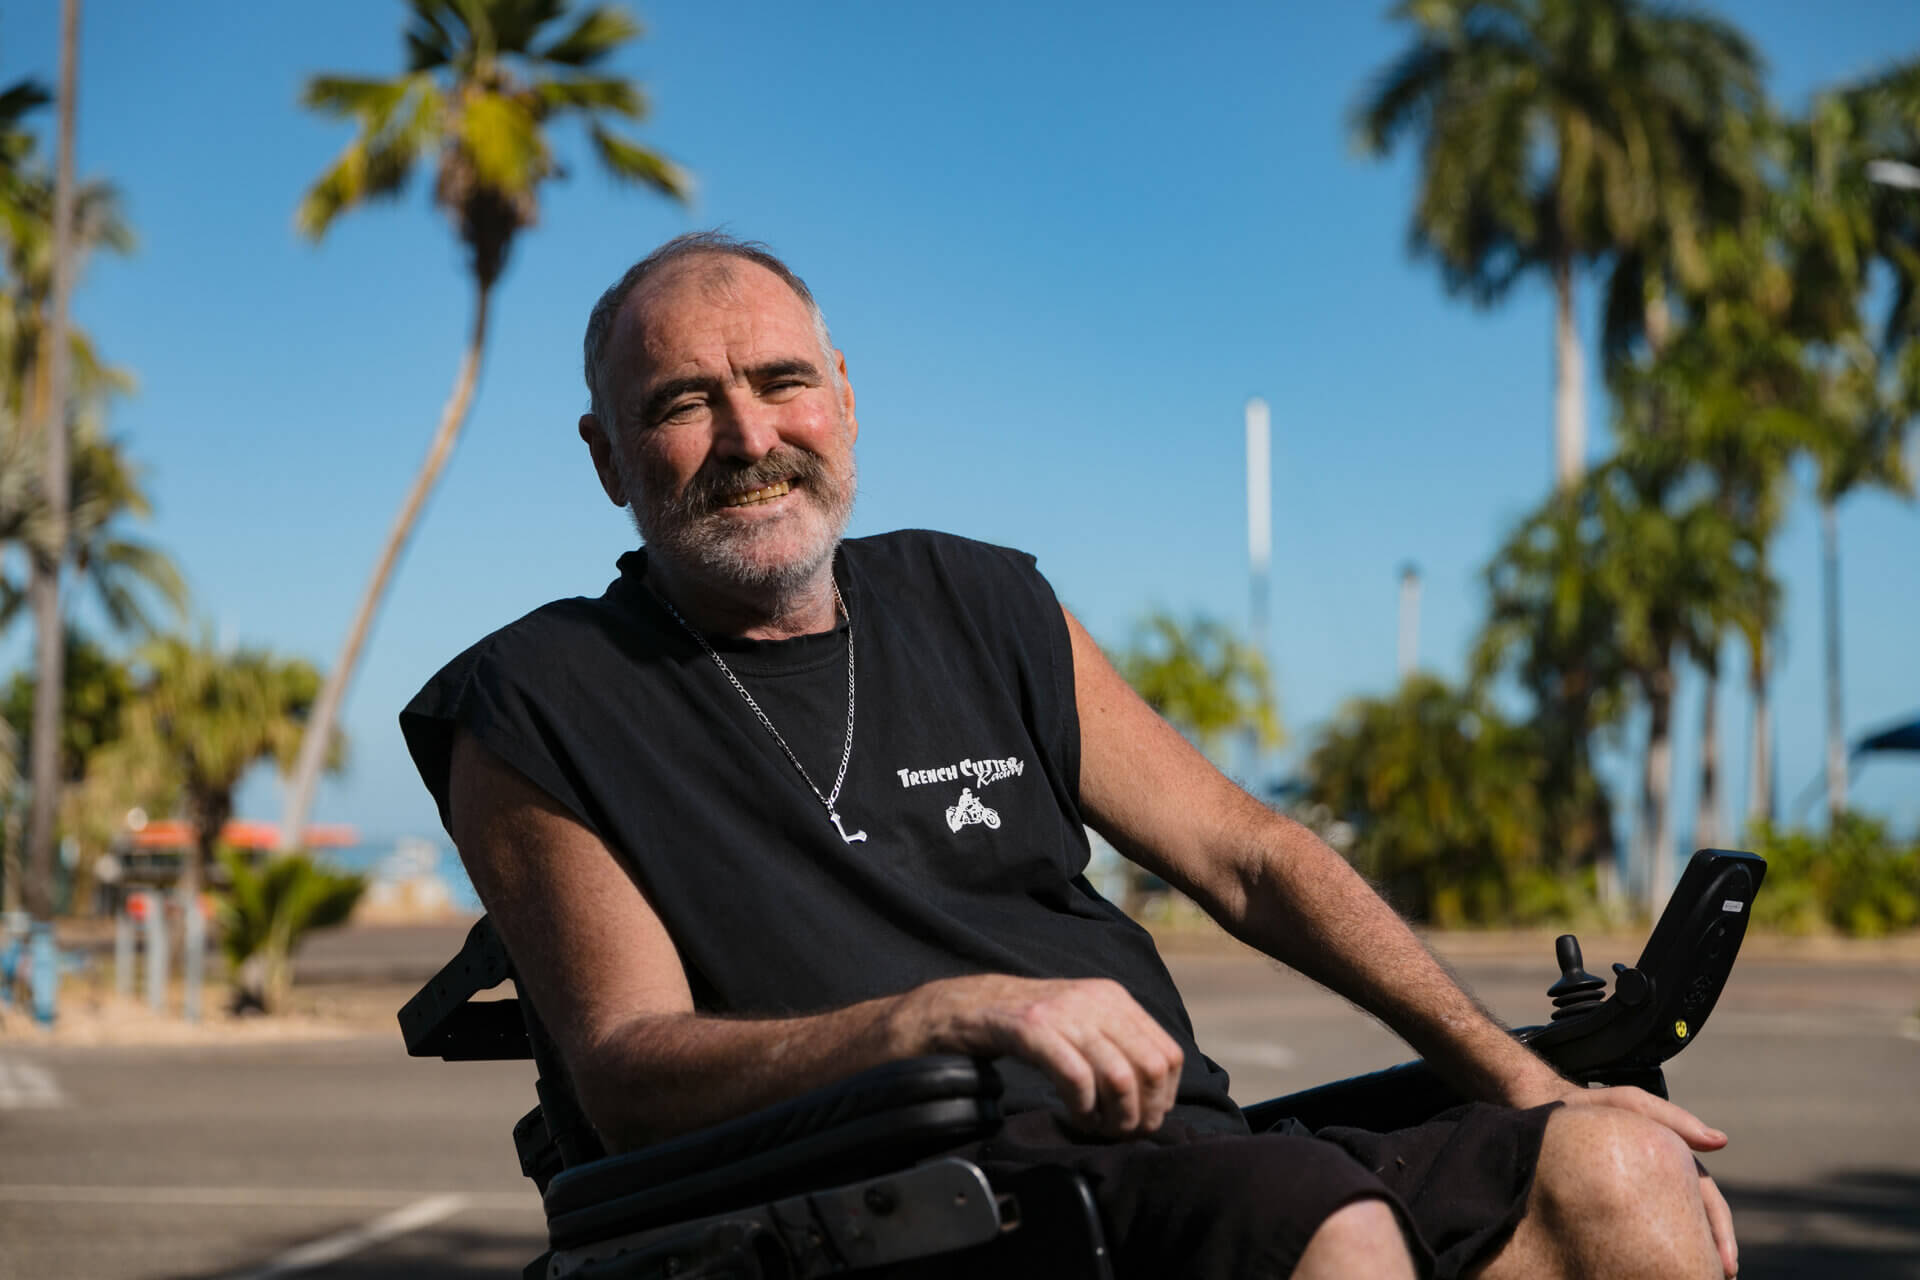 A smiling Paul McKenzie sits in a wheelchair